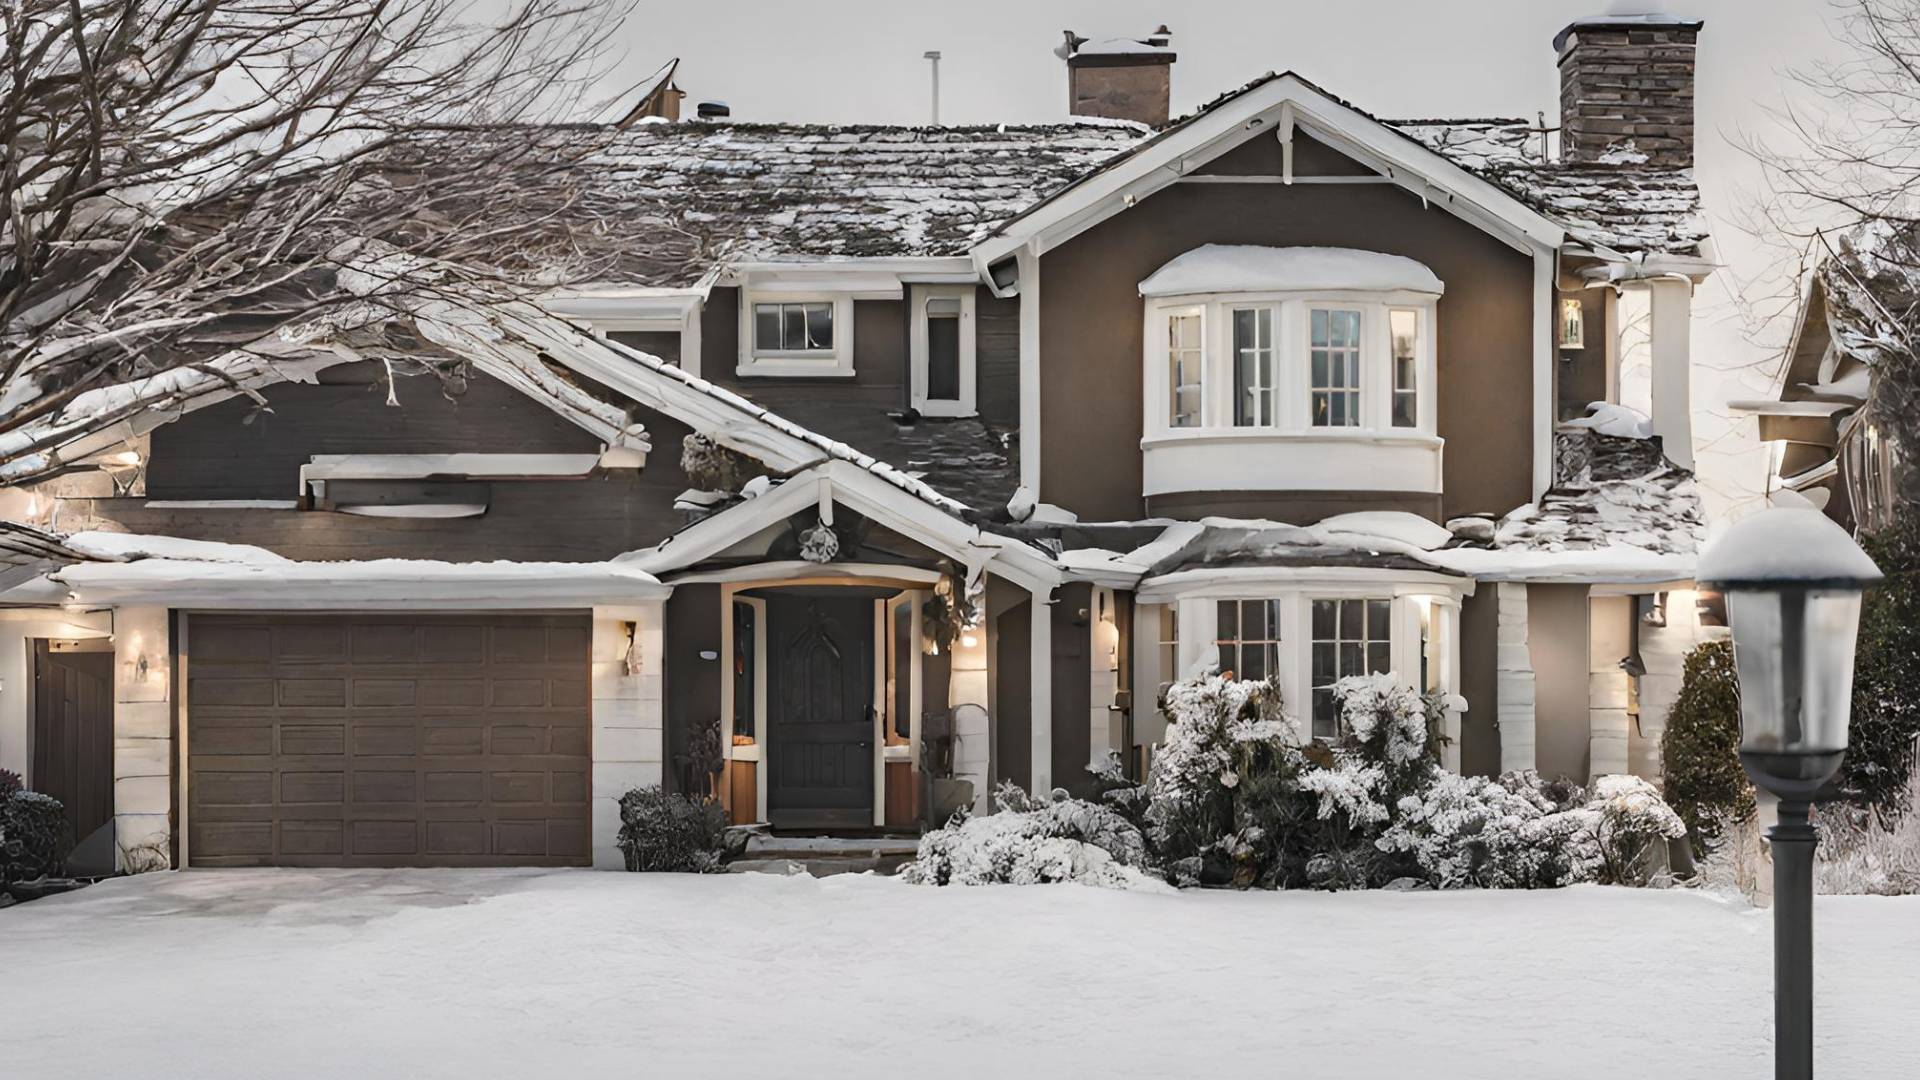 Seling homes in winter